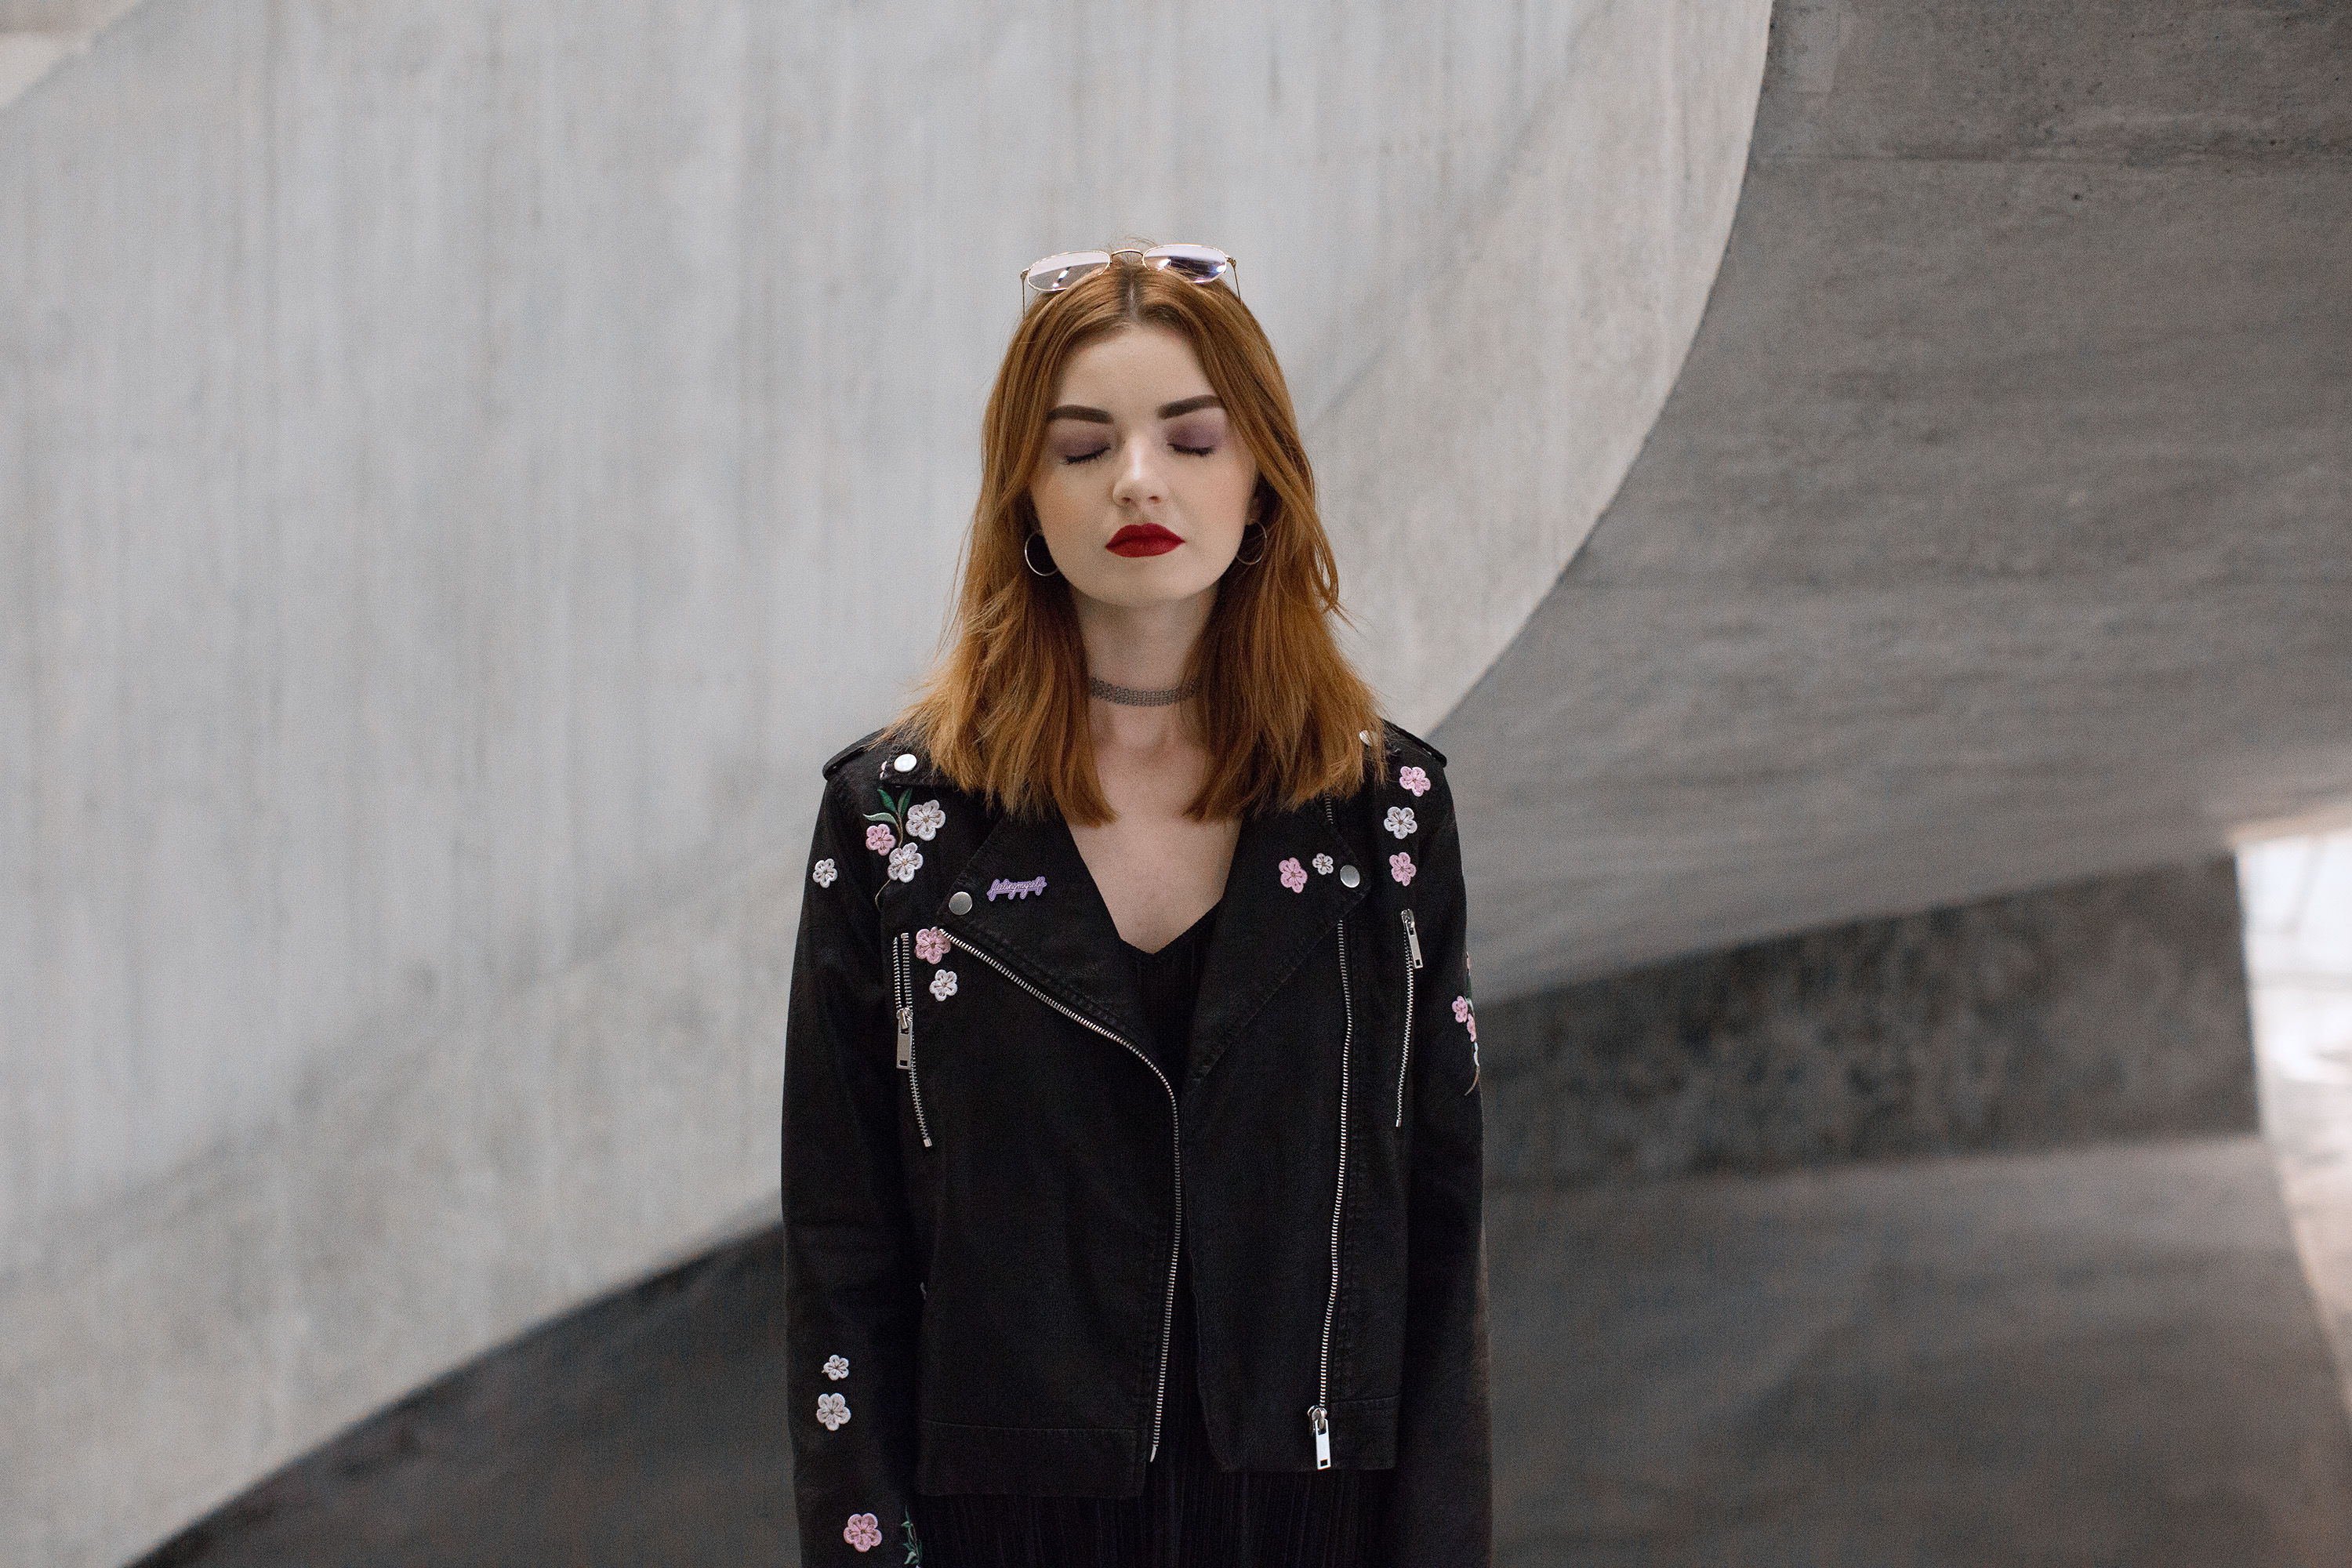 floral-embroidered-leather-jacket